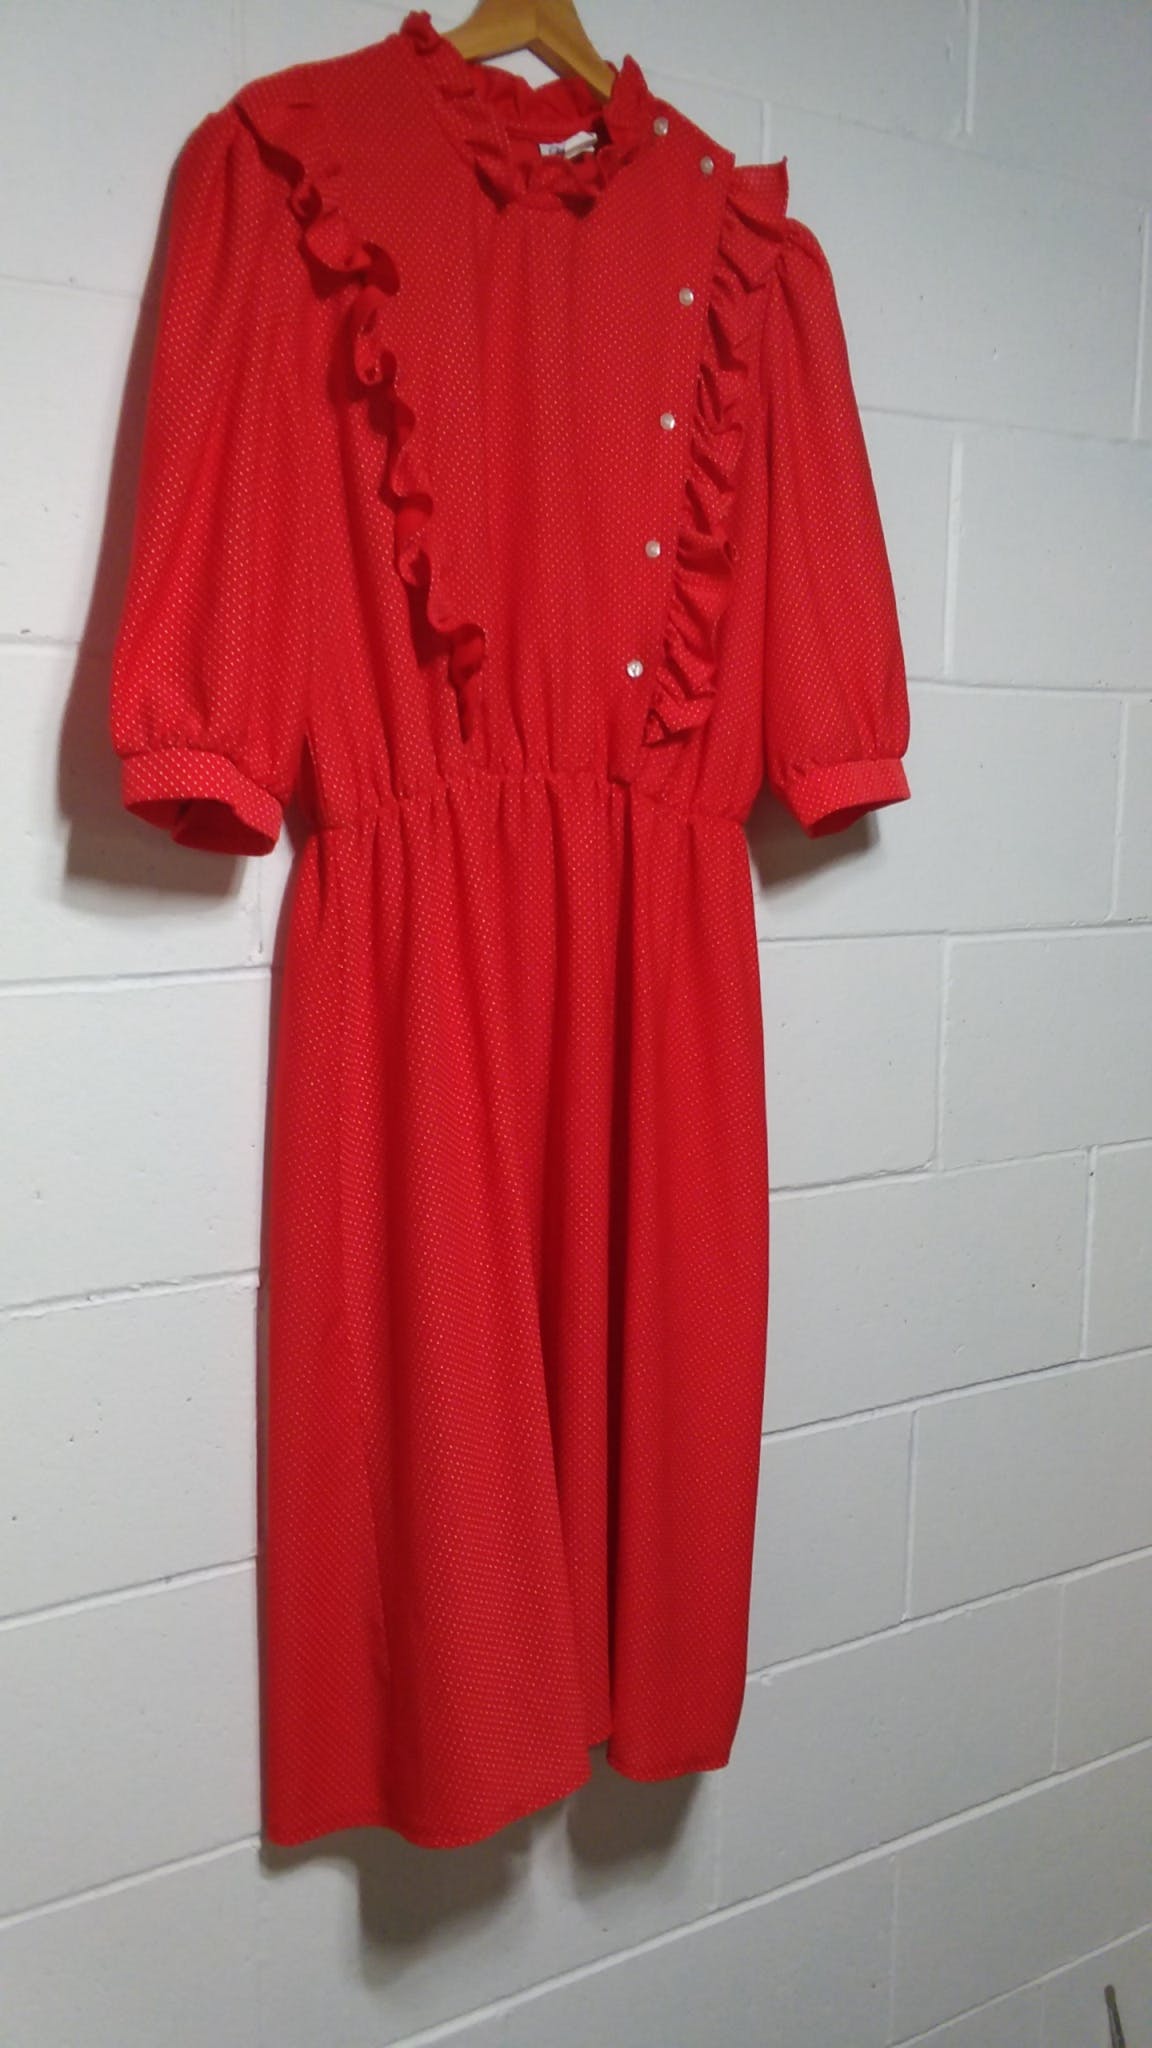 Vintage 80's Red Dress with White Polka Dots and Ruffles by Doral ...